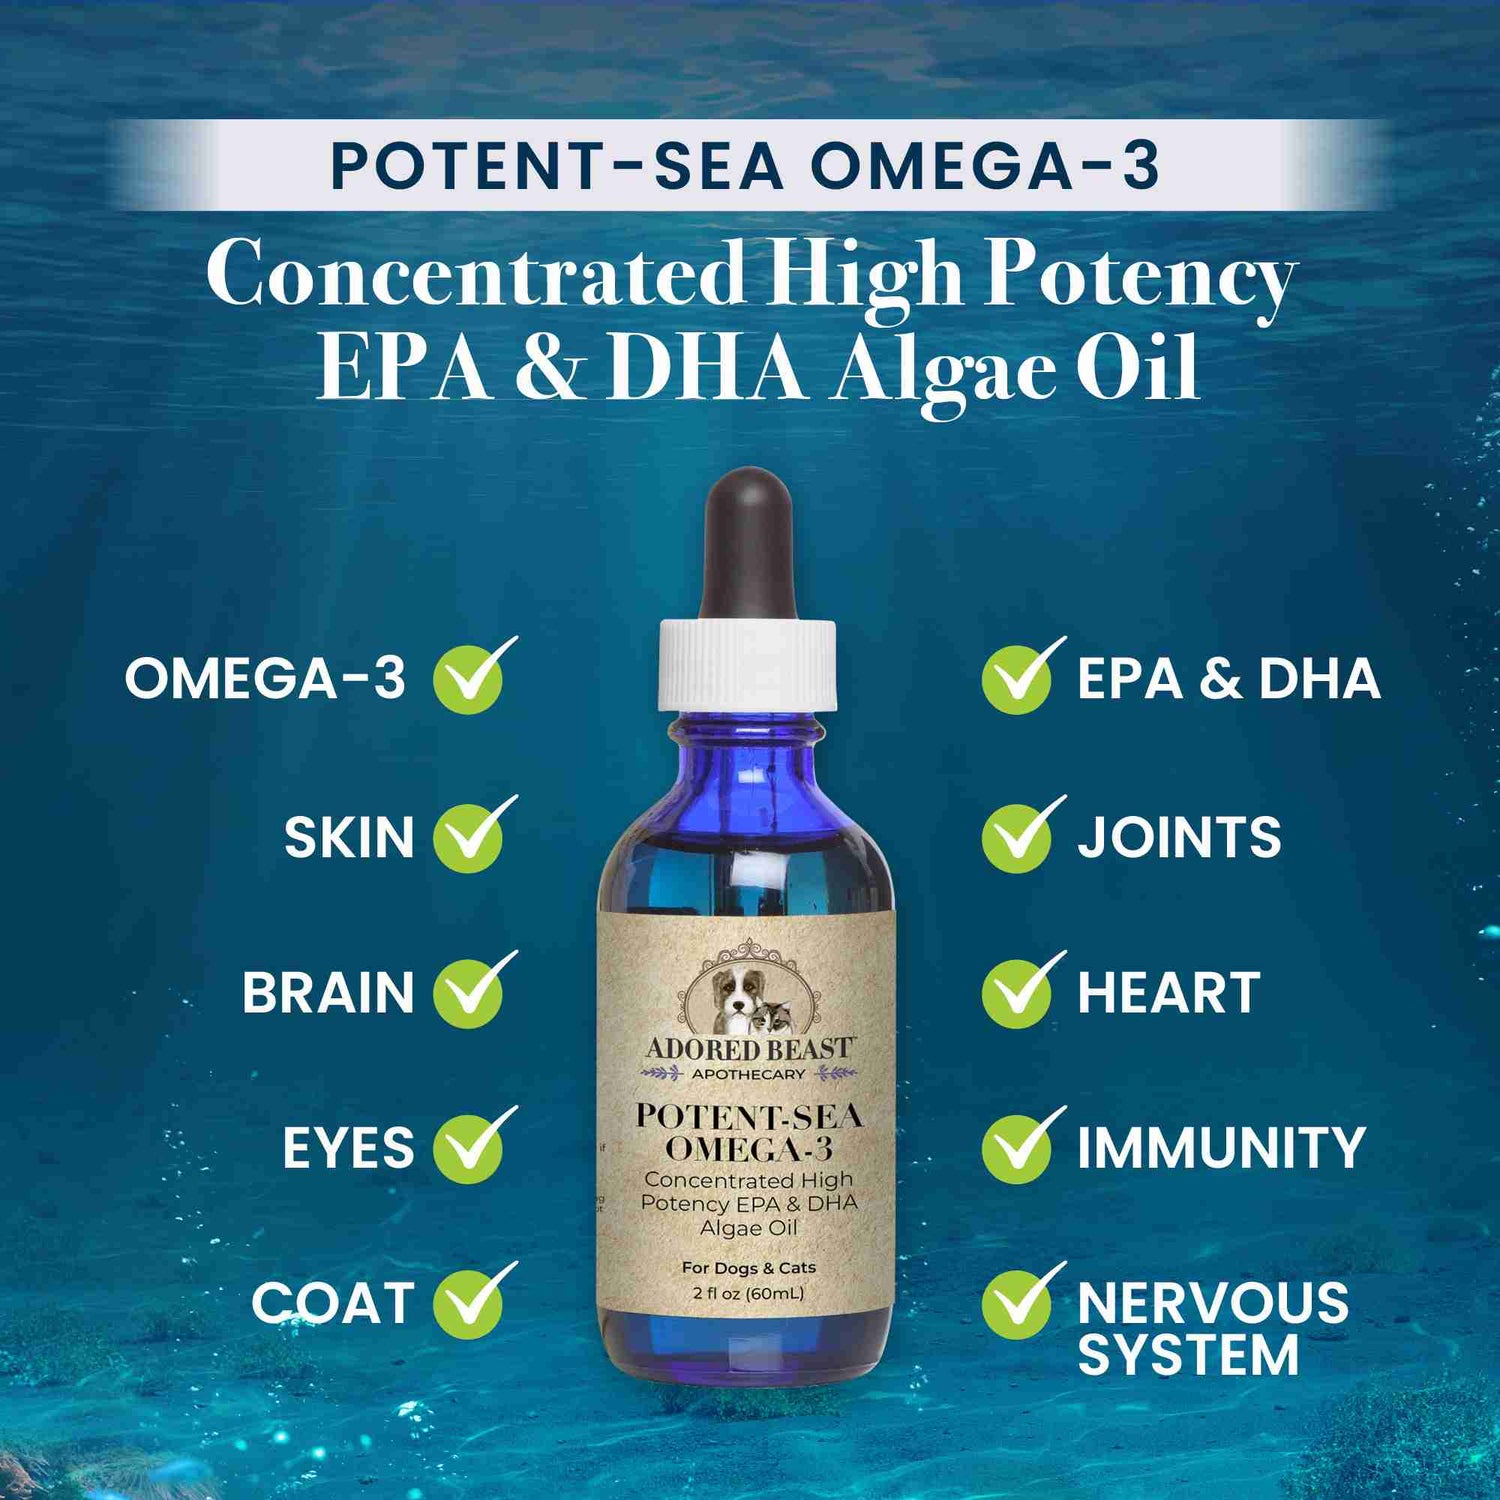 Potent Sea Omega 3 Algae Oil Adored Beast Benefits Concentrated High Potency EPA DHA